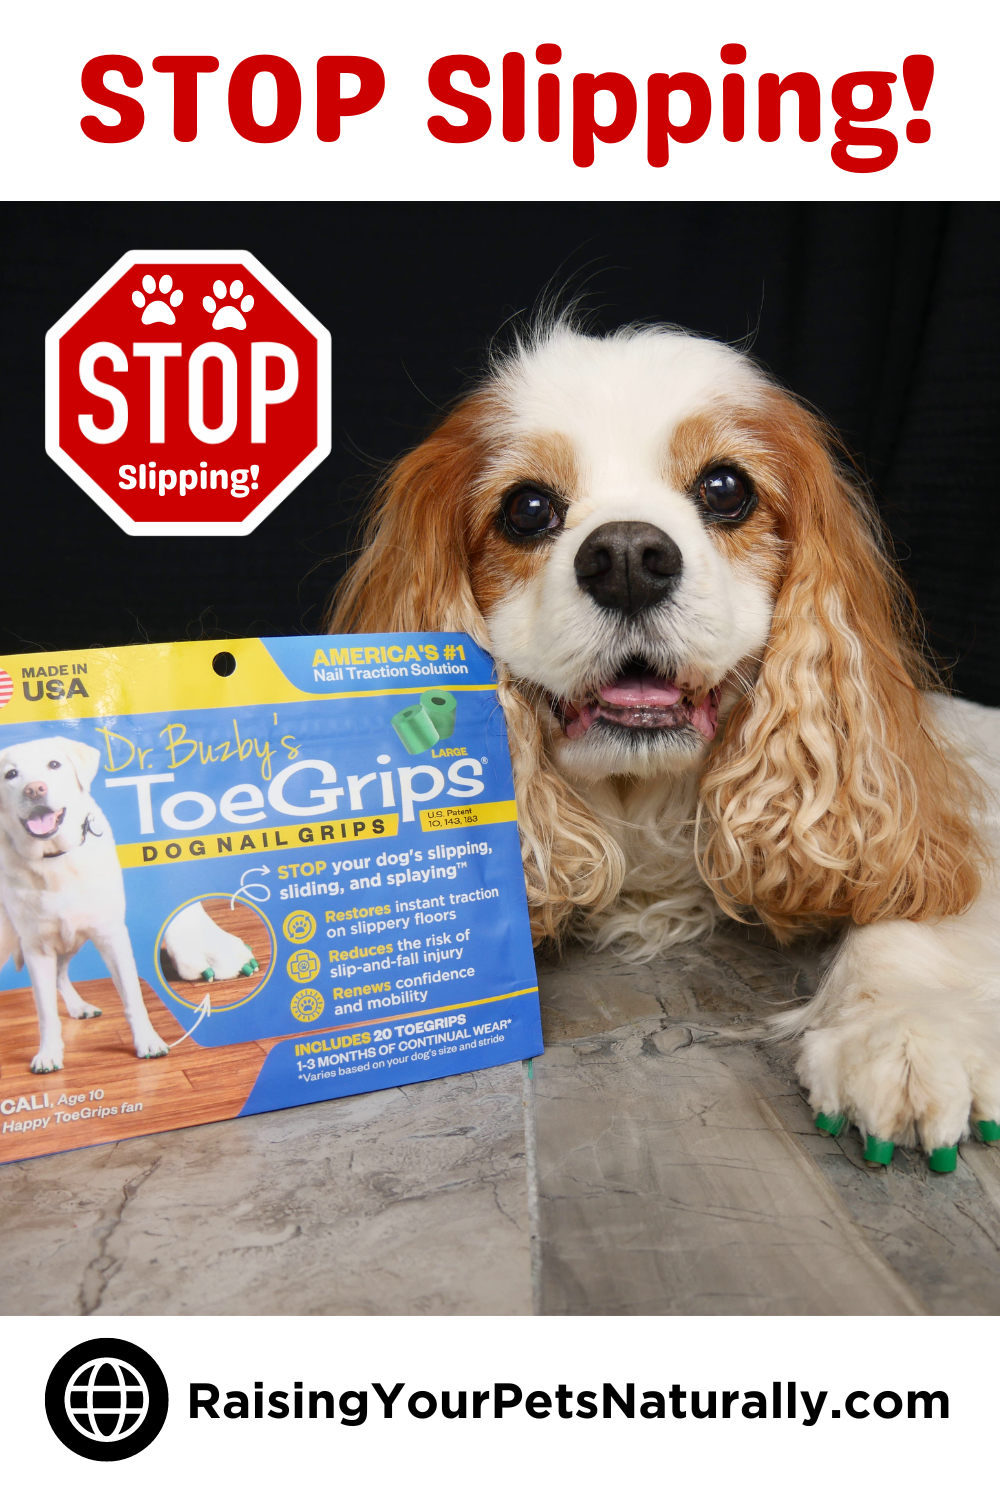 Dr. Buzby\'s ToeGrips for Dogs | The Traction Solution for Senior, Special Needs Dogs and Traction During Medical Recovery (Early access for our Patreon community)